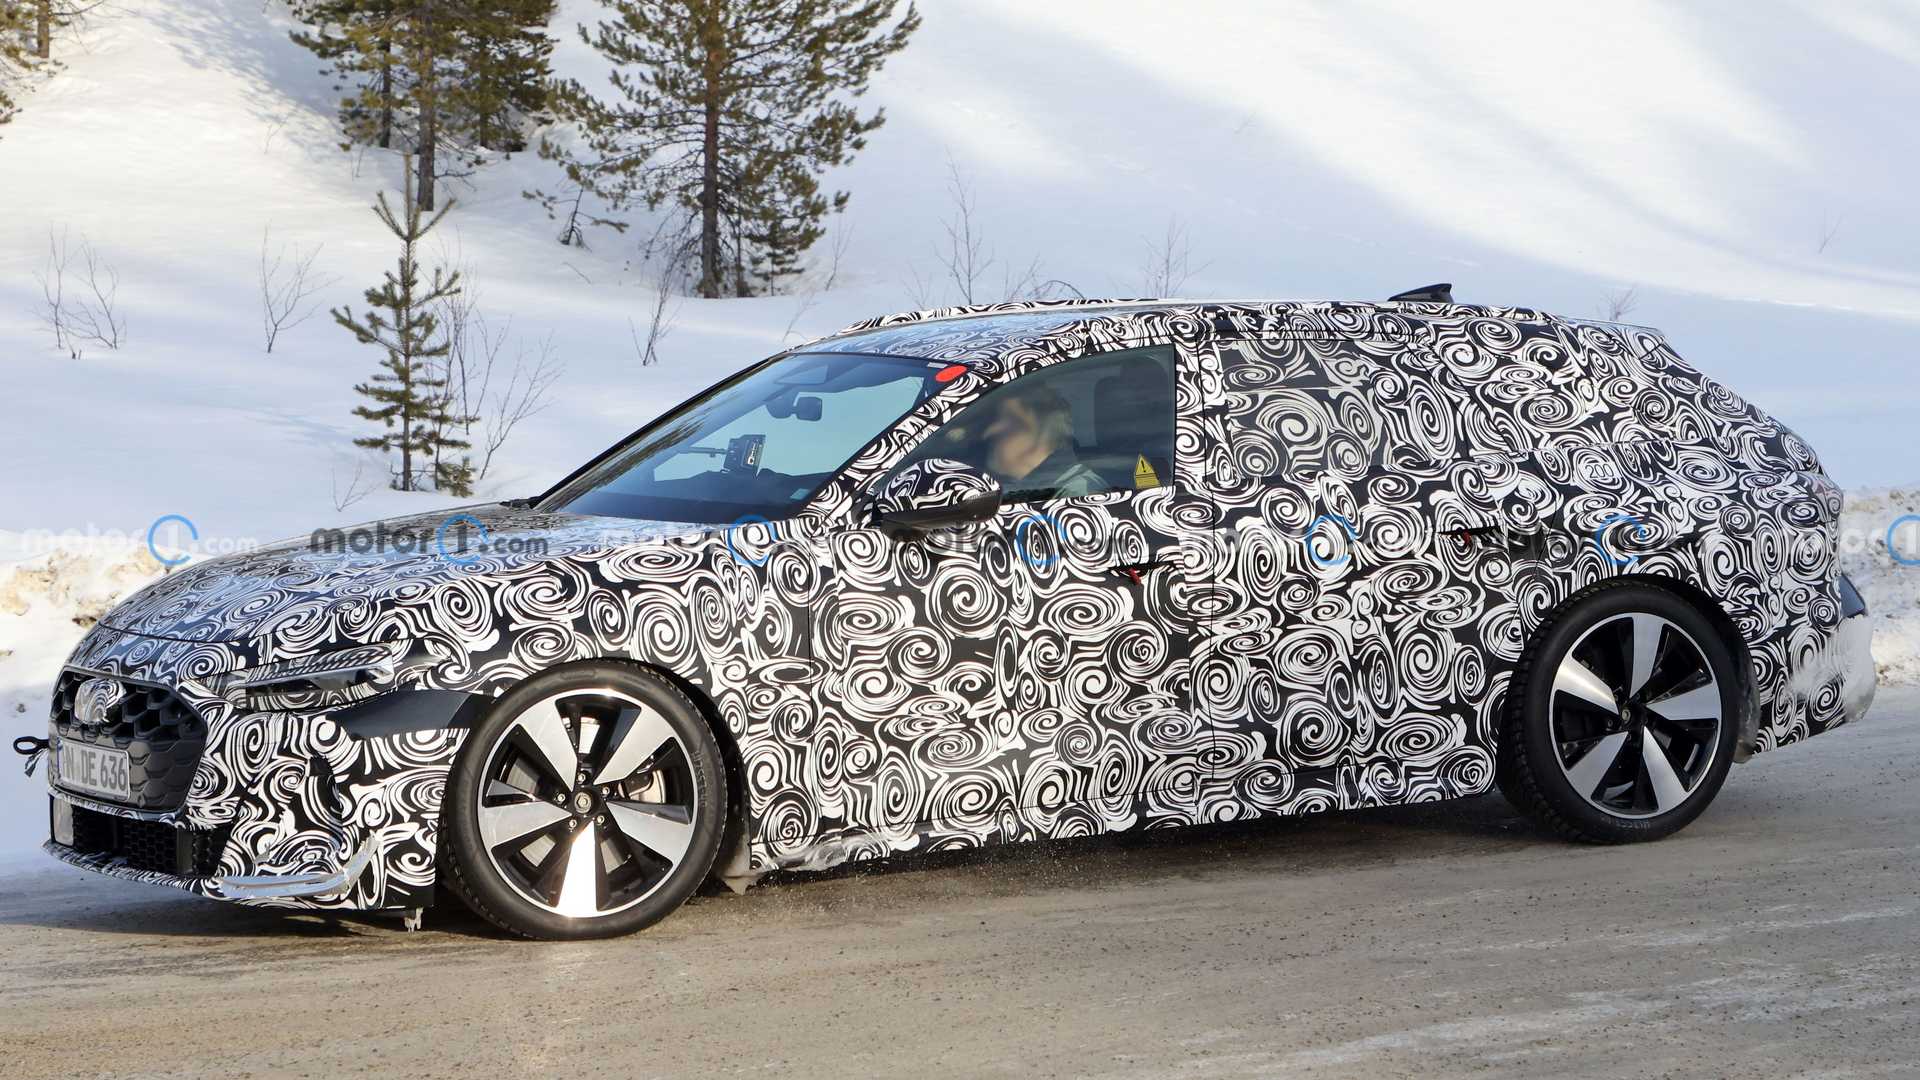 Audi S4 Avant Successor Spied With Smaller Grille During Winter Test